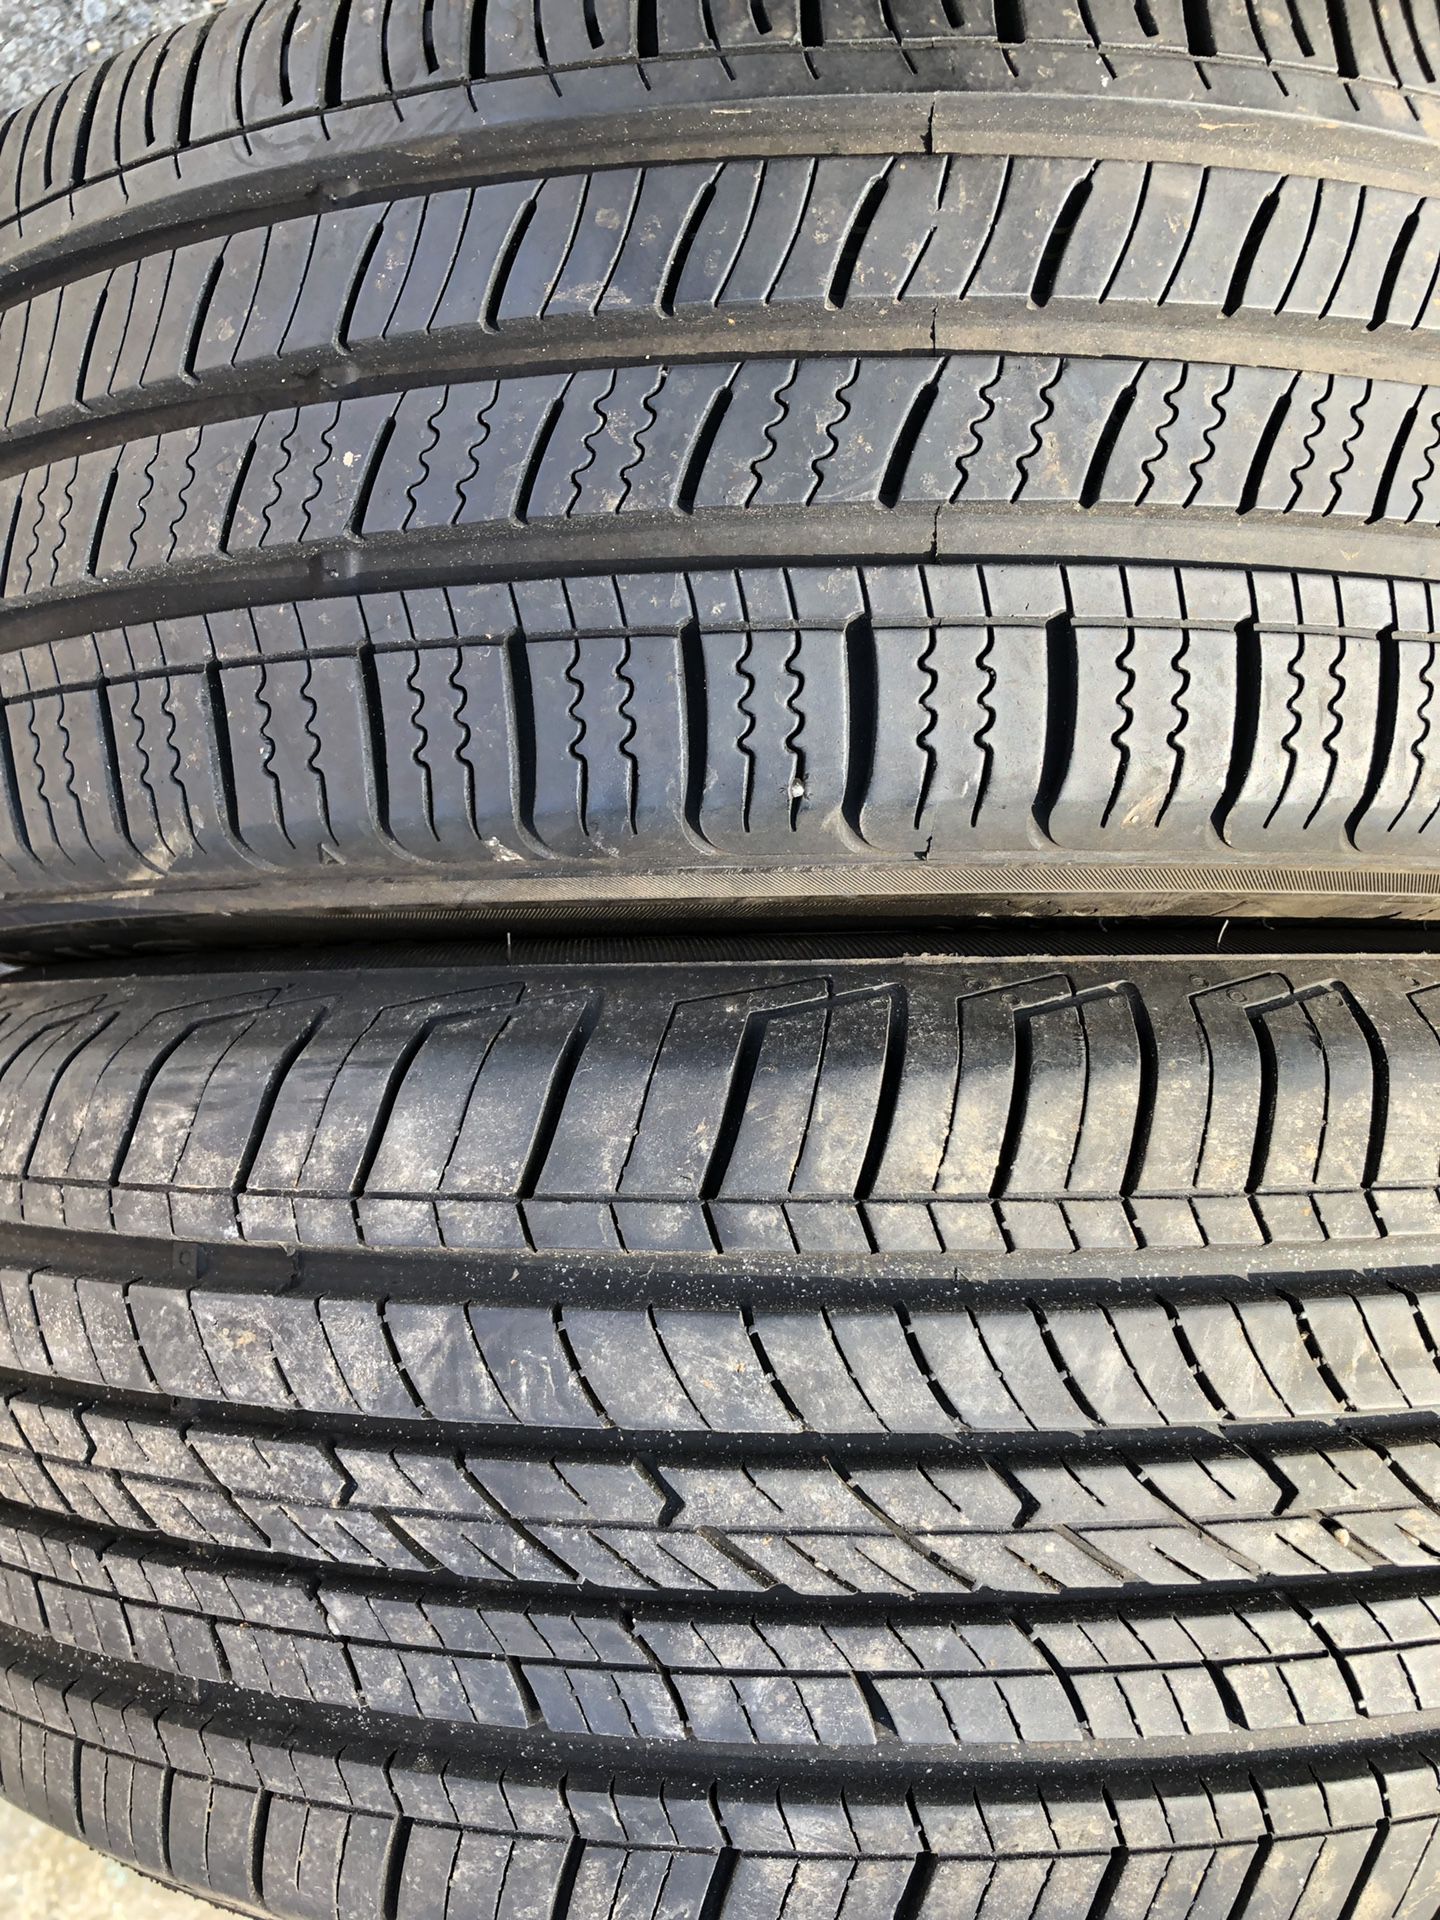 Two used tire 185/60R15 one KUMHO end one COOPER two used tire $45 2 llantas usadas 185/60R15 una KUMHO Y una COOPER por las 2 llantas $45